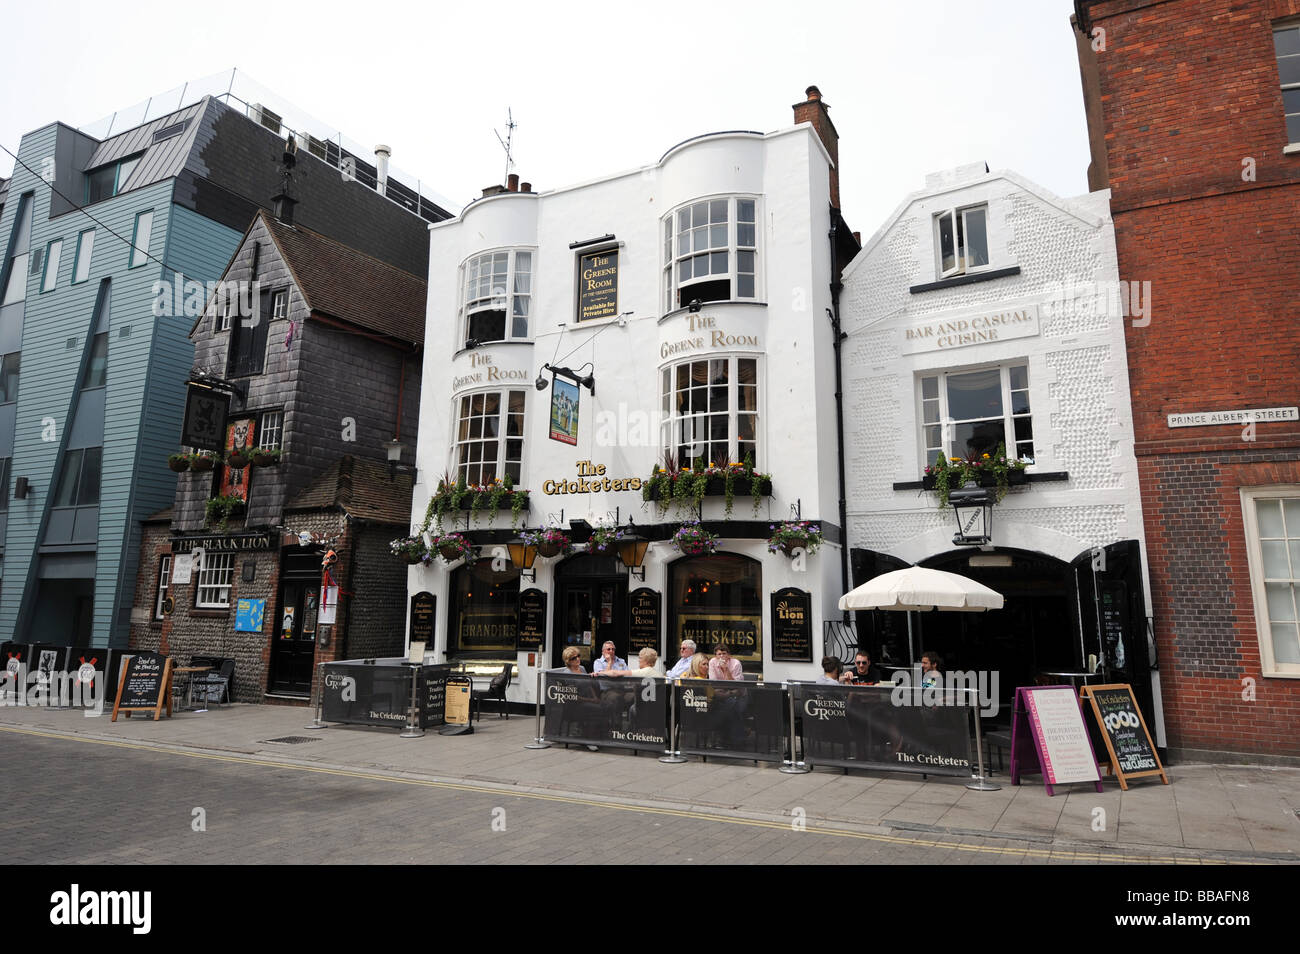 The Cricketers and Black Lion pubs in the Lanes area of Brighton Stock Photo